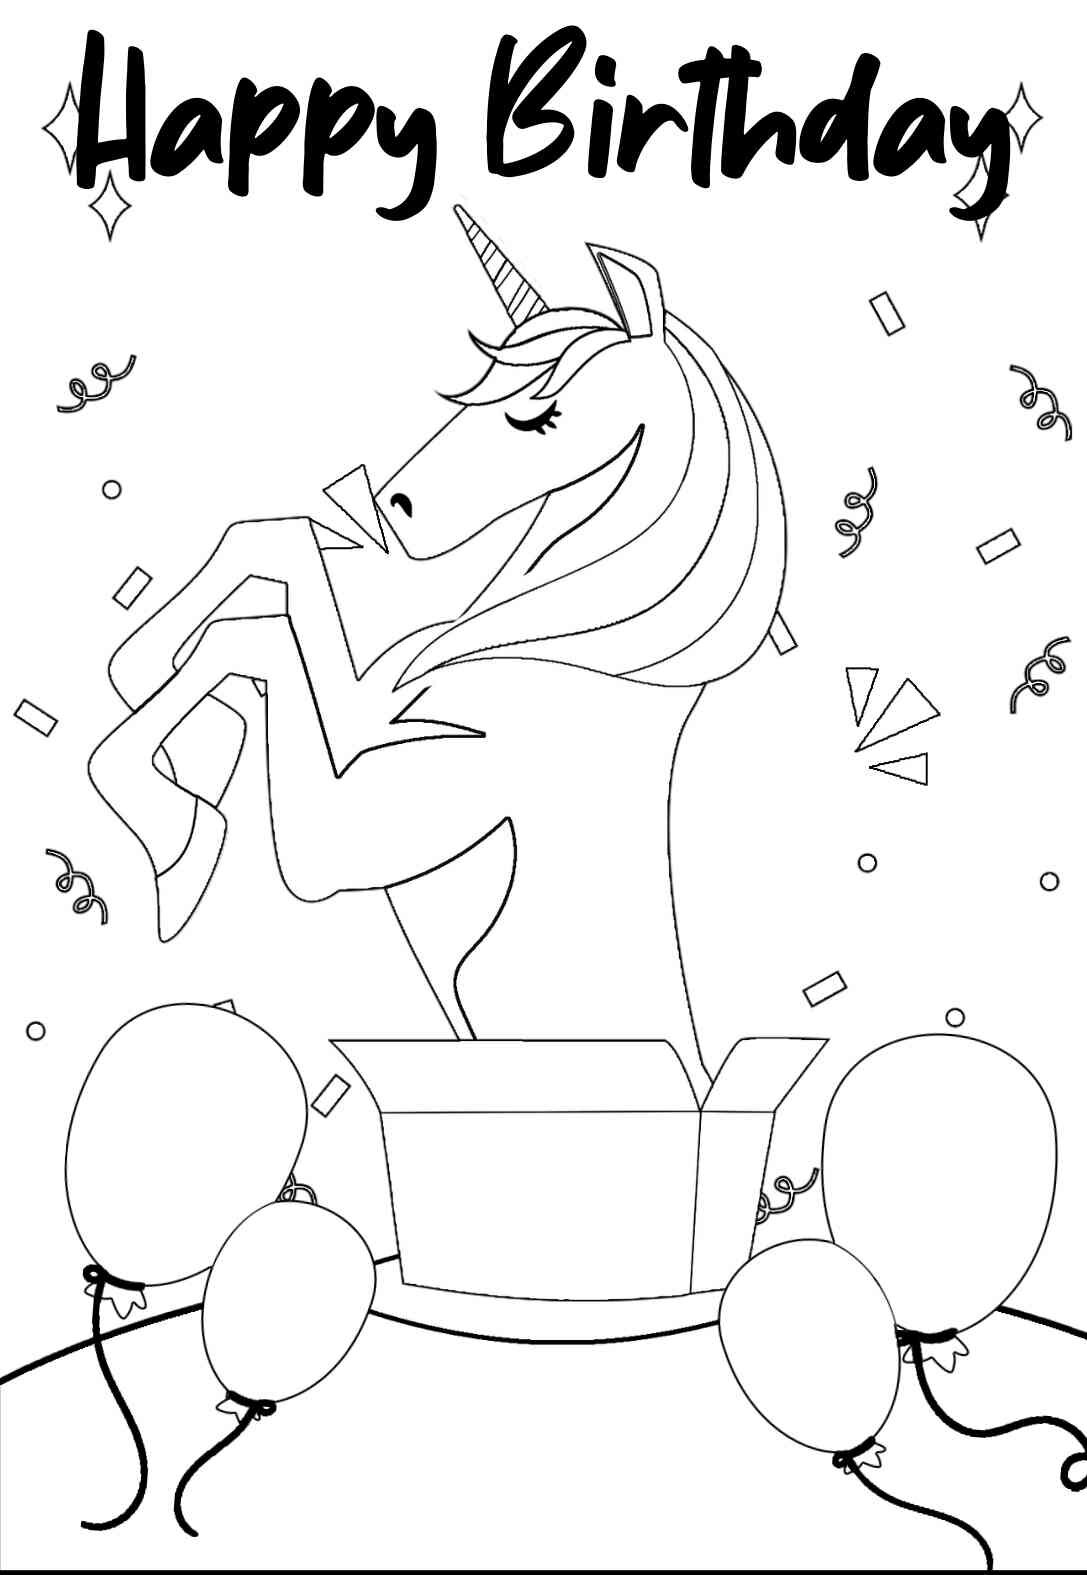 14 Unbelievable Unicorn Coloring Pages & Cards (free) — PRINTBIRTHDAY.CARDS